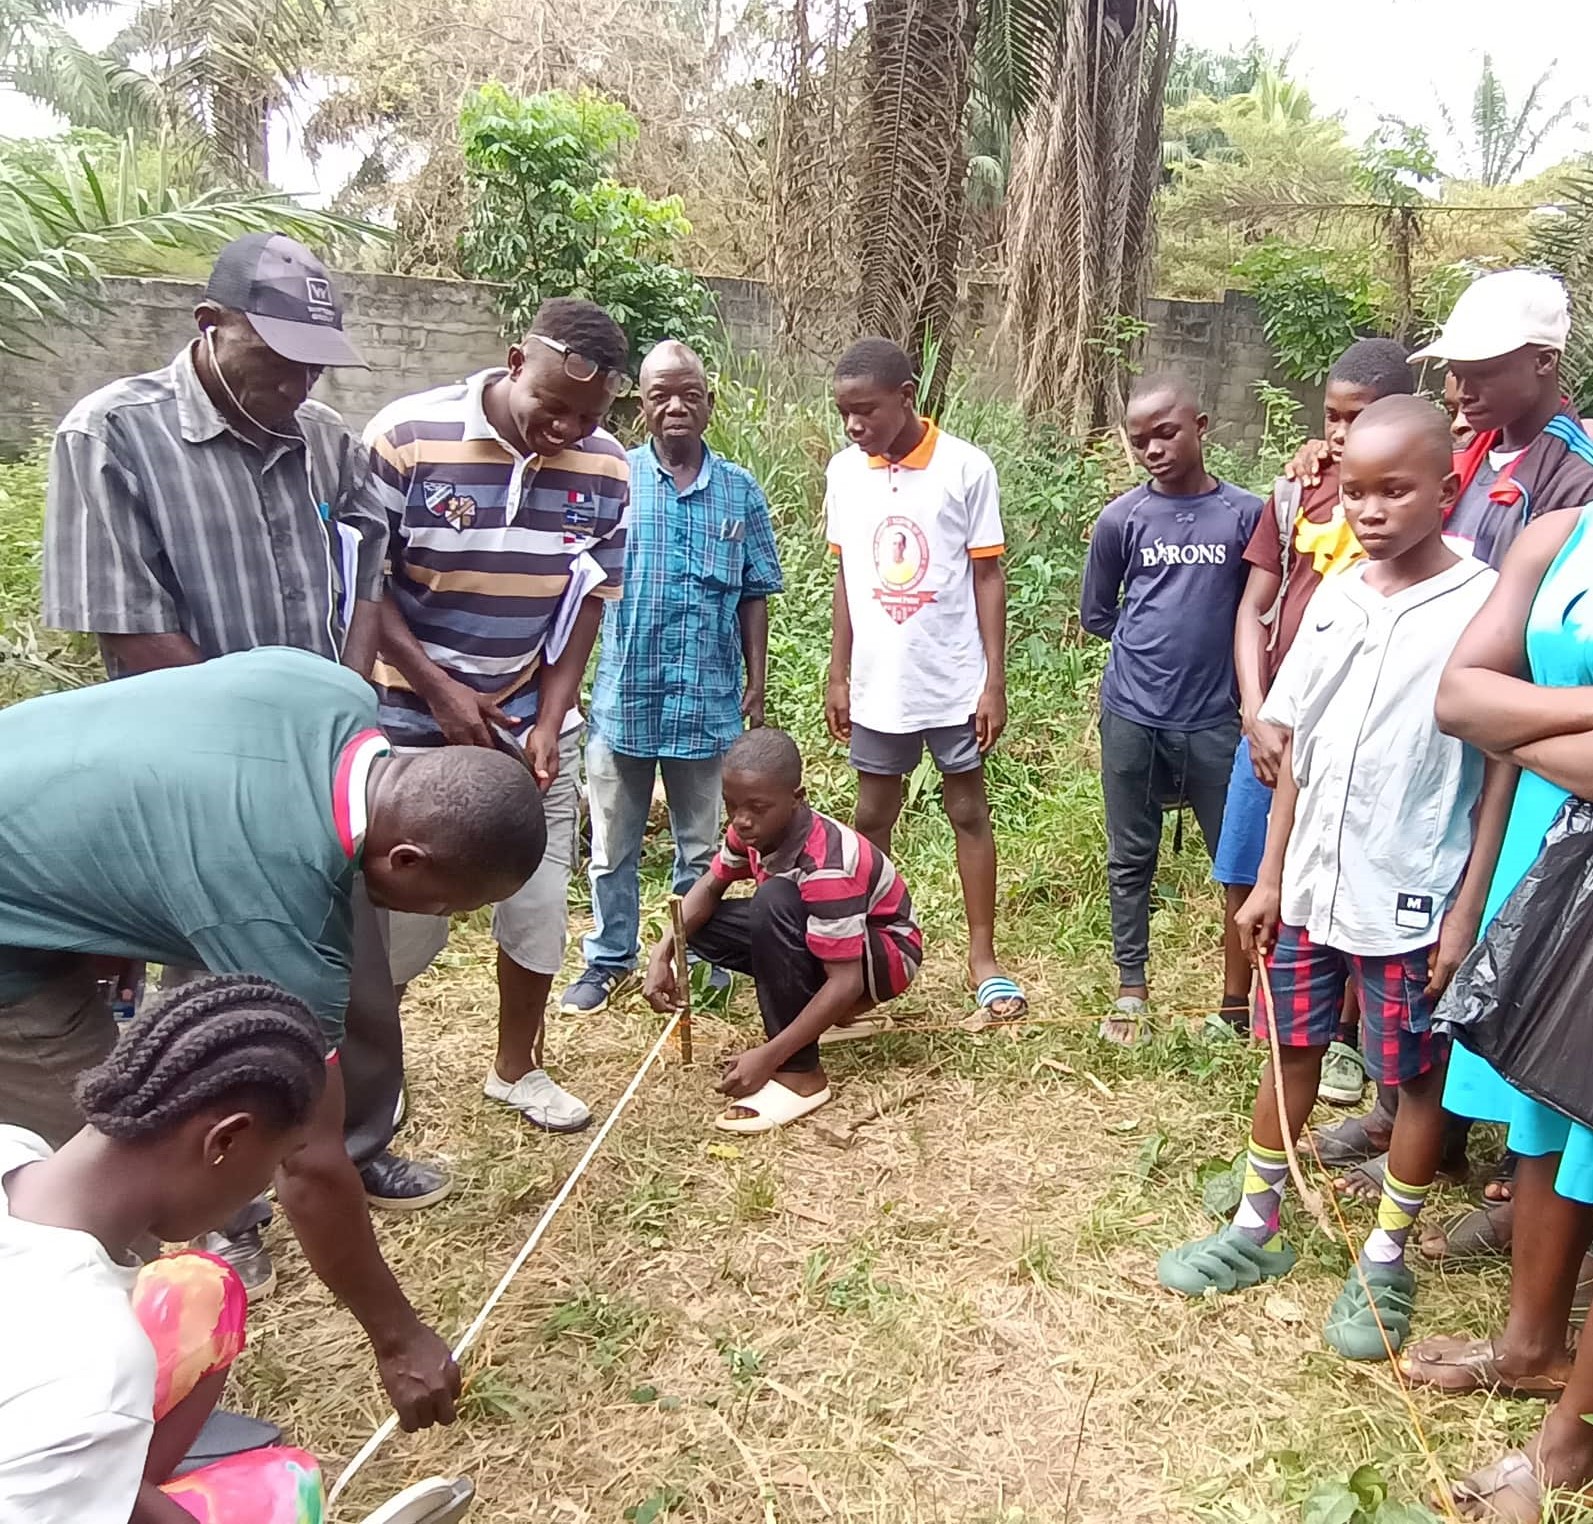 John Kucuyoiyoigee one of our trainers, is teaching the students how to measure out the garden beds. Preston Gonmiah is their Agriculture Teacher. He is in the orange striped T-shirt. Preston was honored with a Thrive Institute Scholarship.